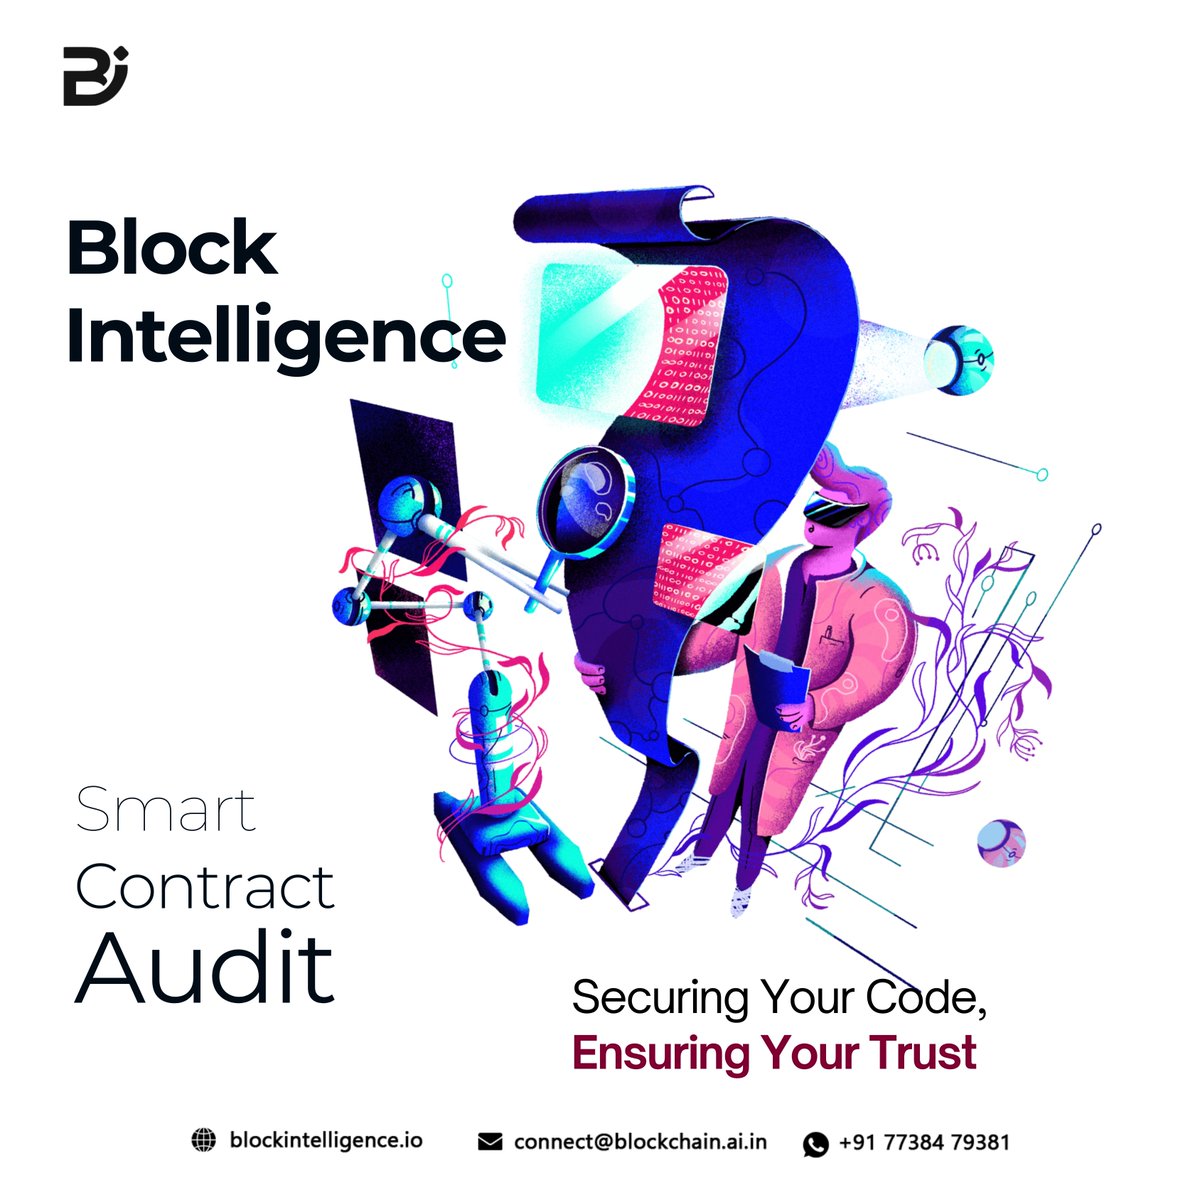 Experience the Power of Secure Smart Contracts with Block Intelligence

#smartcontracts #smartcontractaudit #audit #blockchain #digitalasset #contracts #AI #web3 #web3wallet #web3security #web3learning #web3community #web3technology #digitalassets #digitalassetmanagement